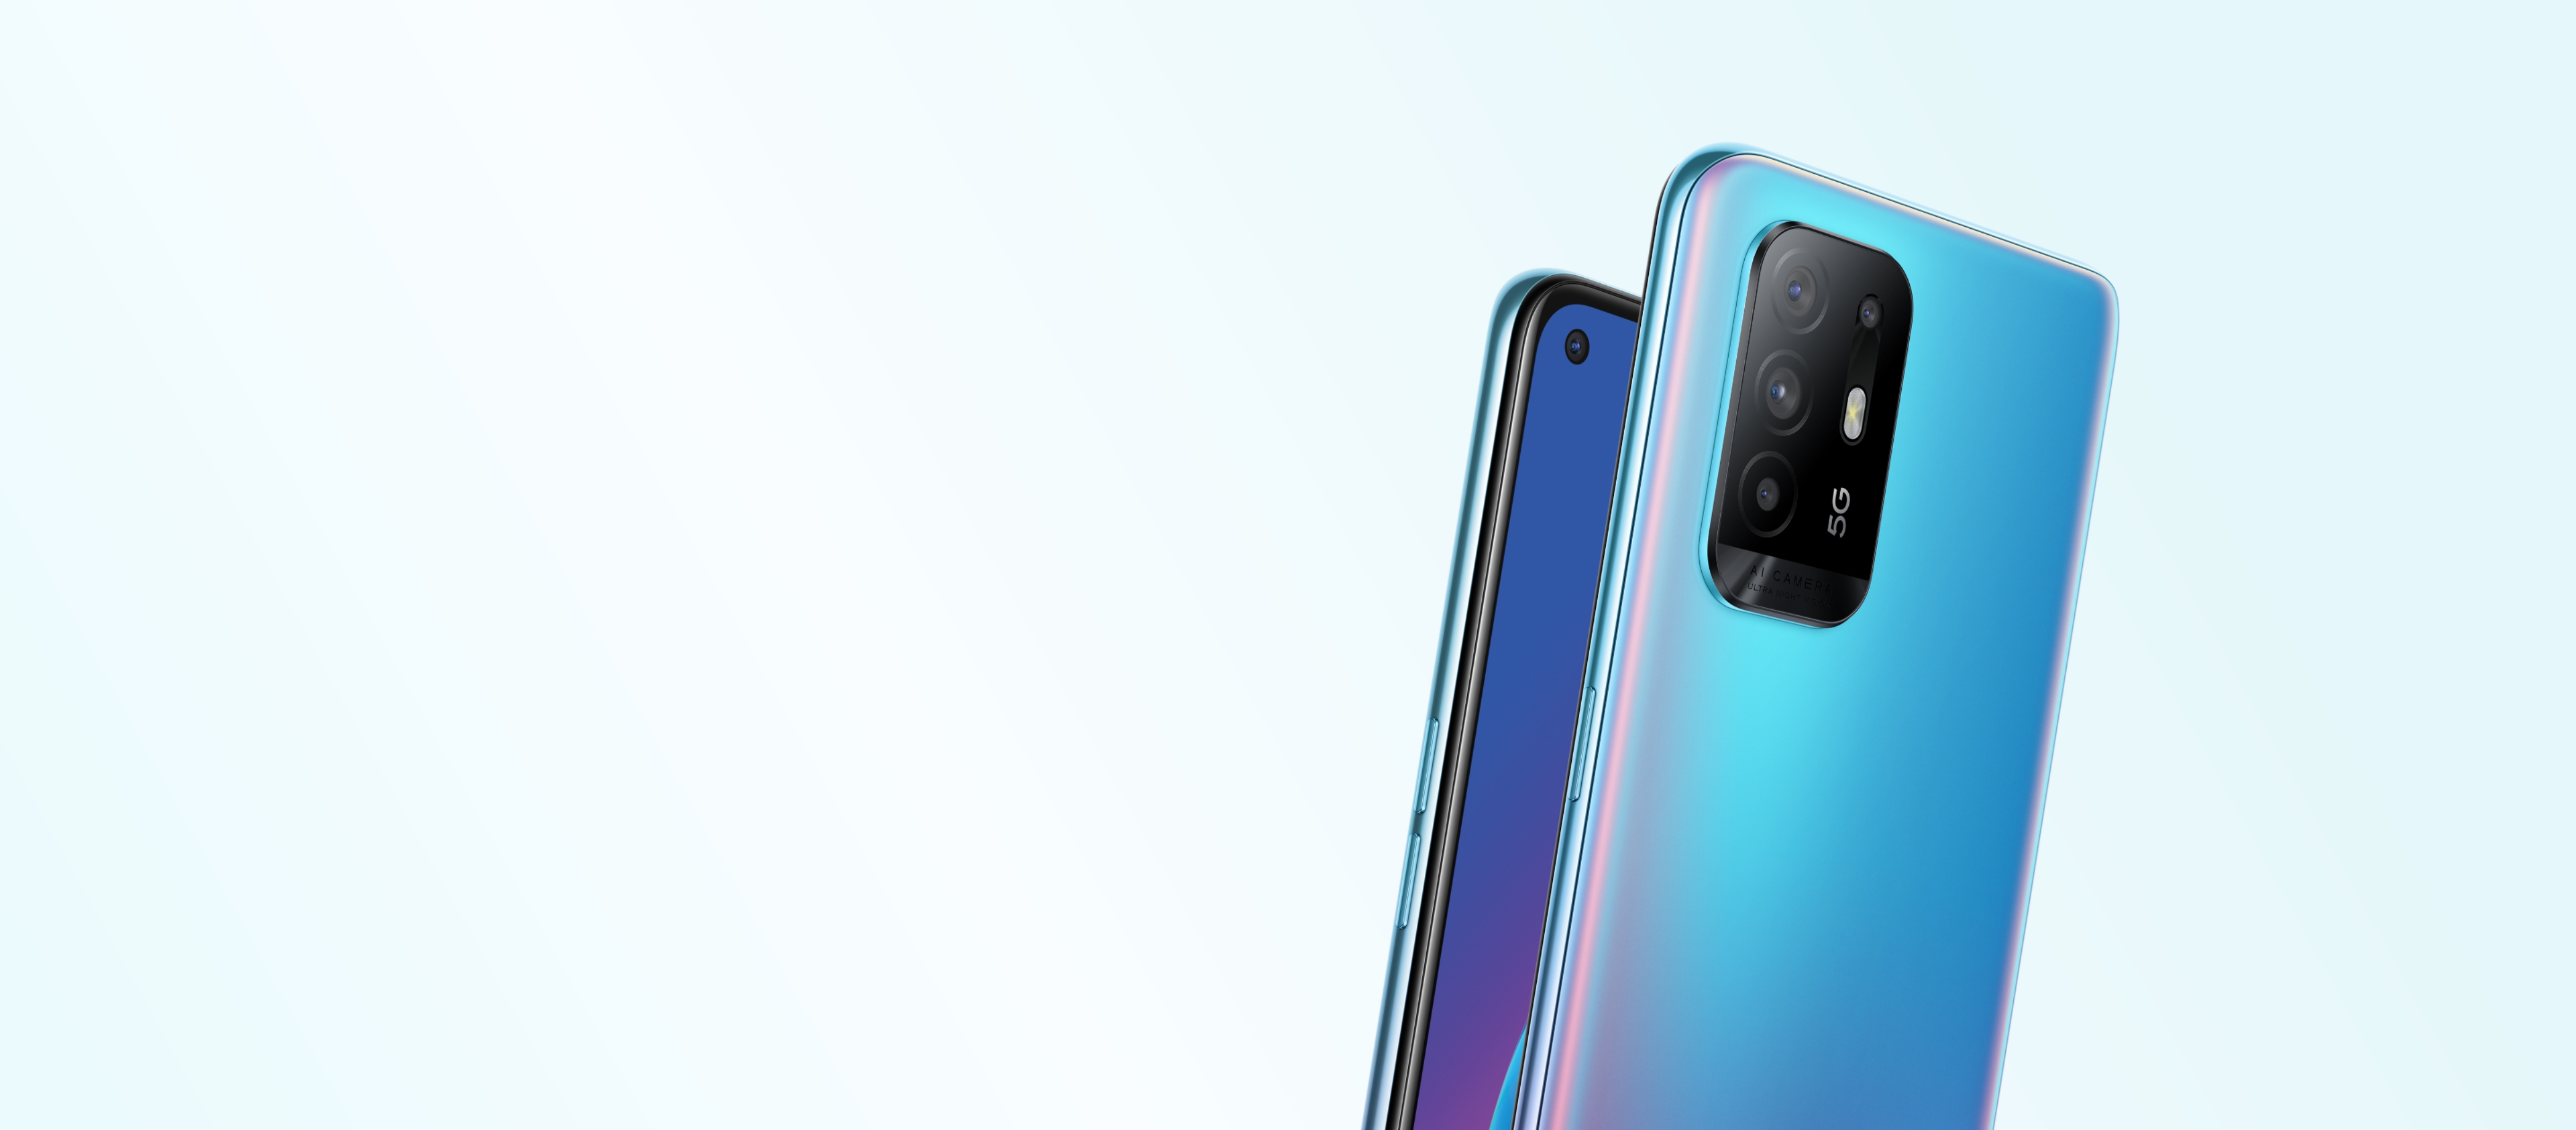 OPPO A94 5G Cosmo Blue